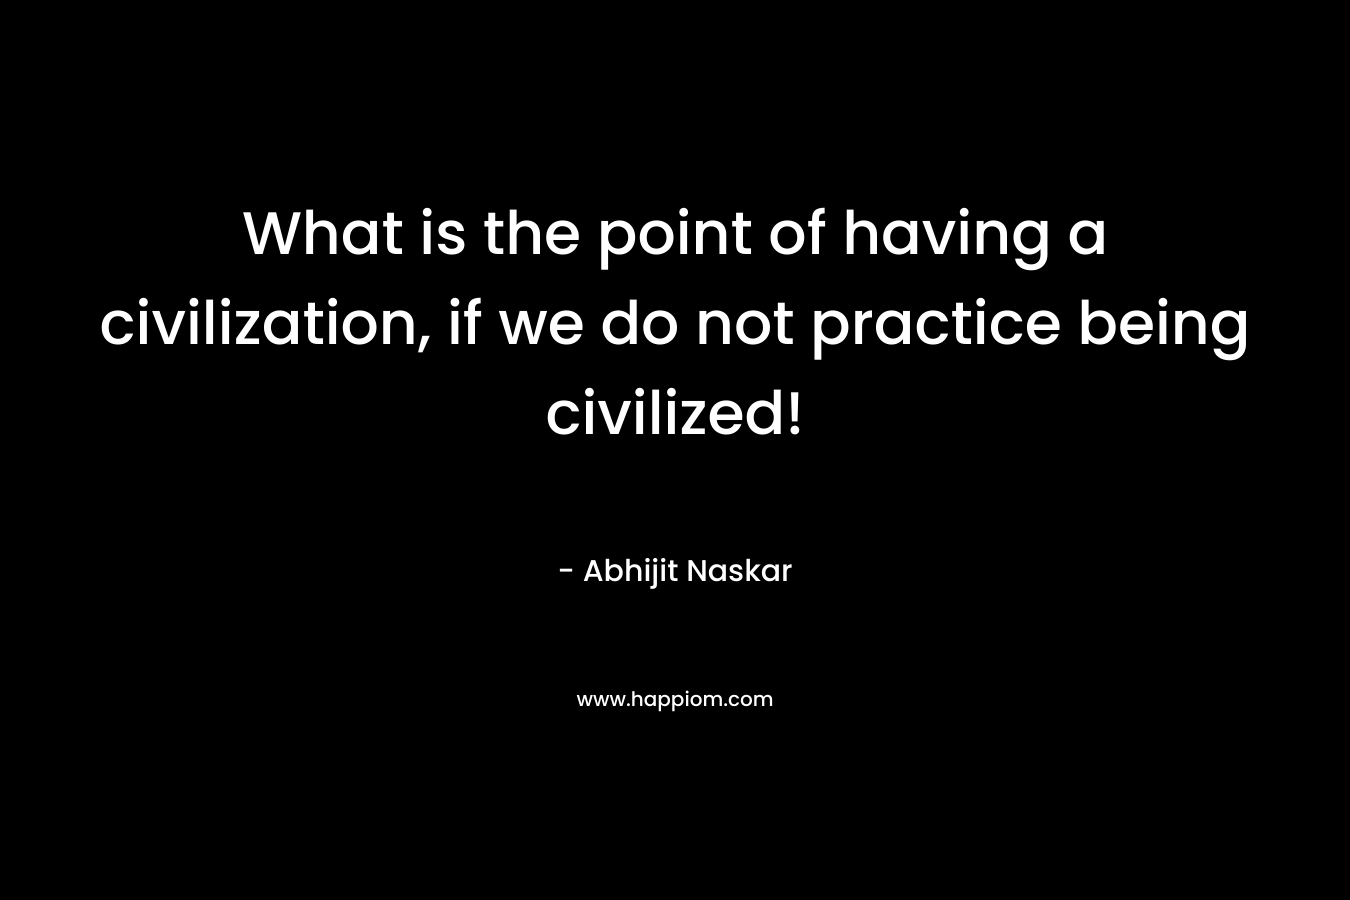 What is the point of having a civilization, if we do not practice being civilized!